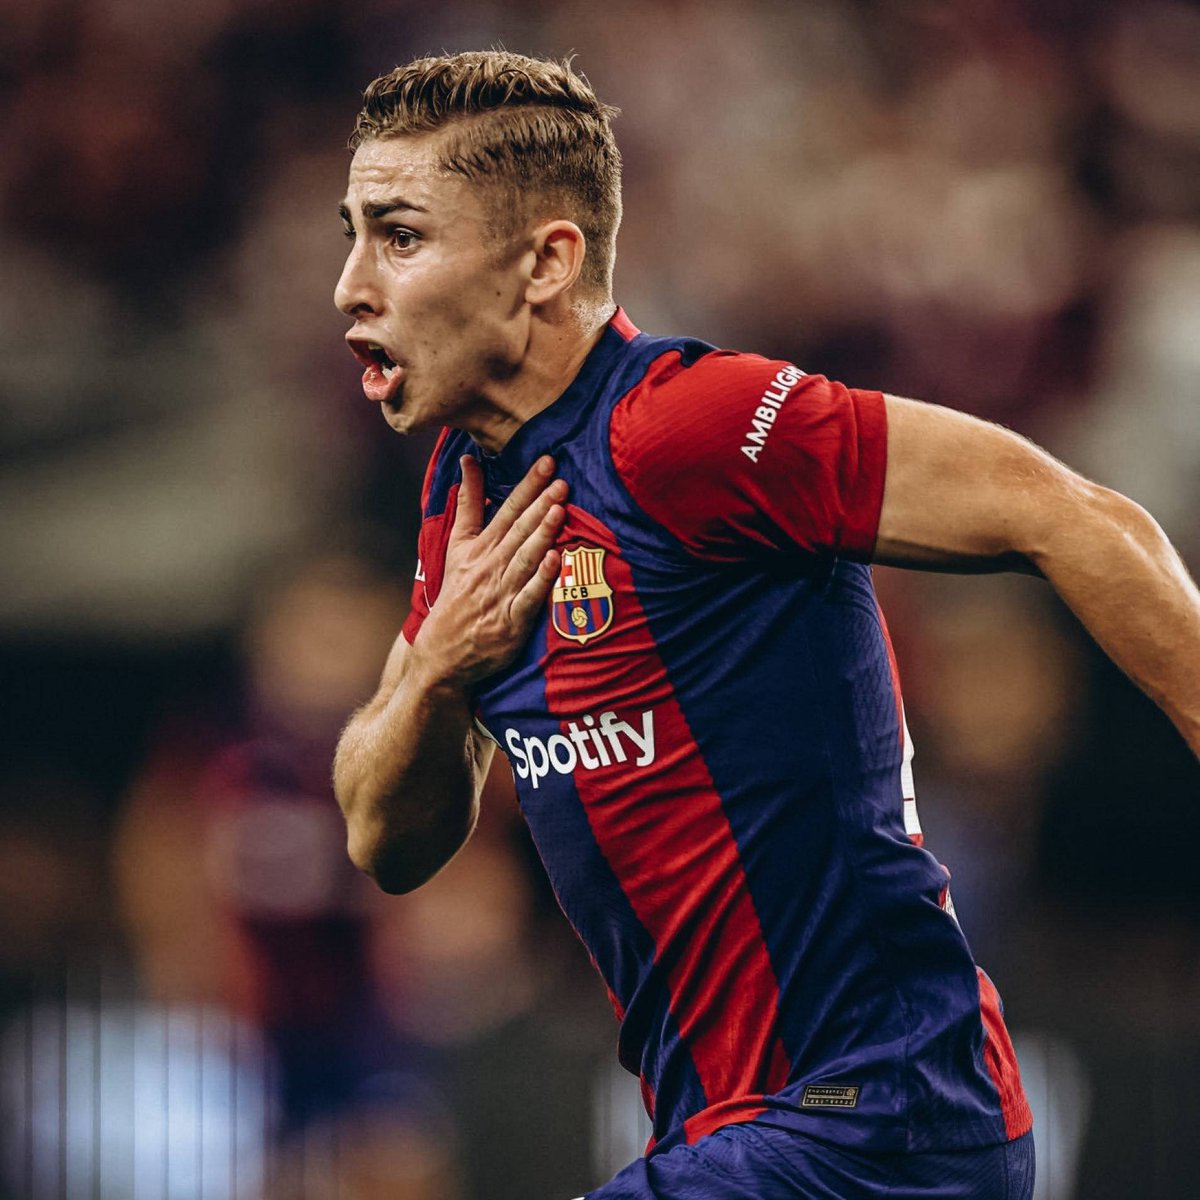 🚨🎖| JUST IN: Barcelona are working on the RENEWAL of Fermín Lopez. Xavi counts on him fully and considers him non-transferable. He already renewed his contract last summer until 2027 but Barça want him to extend further 1-2 years. [@tjuanmarti] #fcblive ⭐